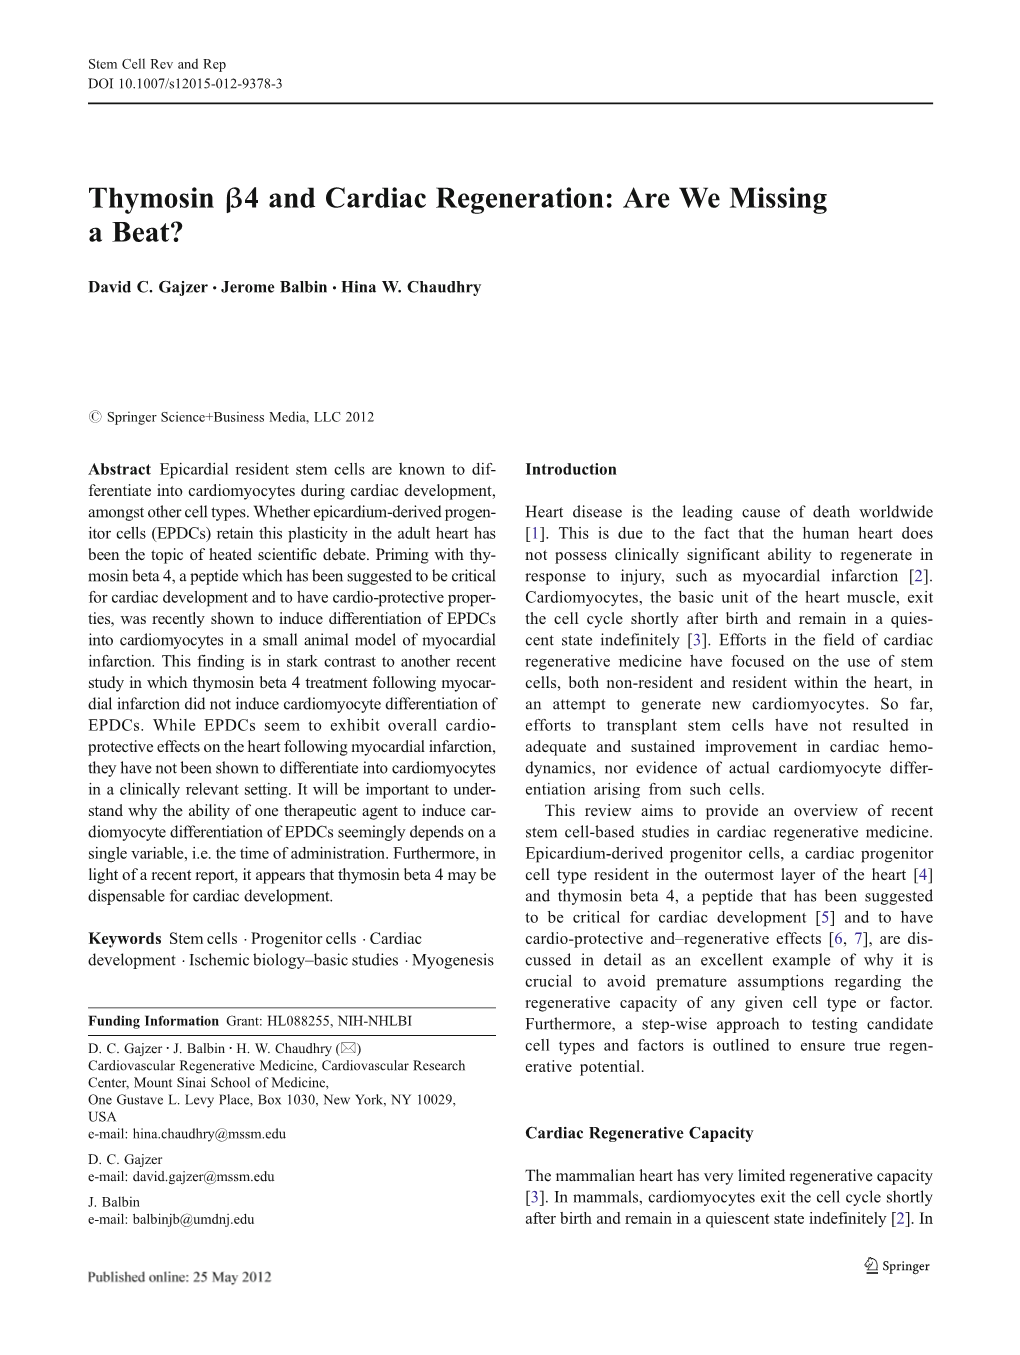 Thymosin Β4 and Cardiac Regeneration: Are We Missing a Beat?